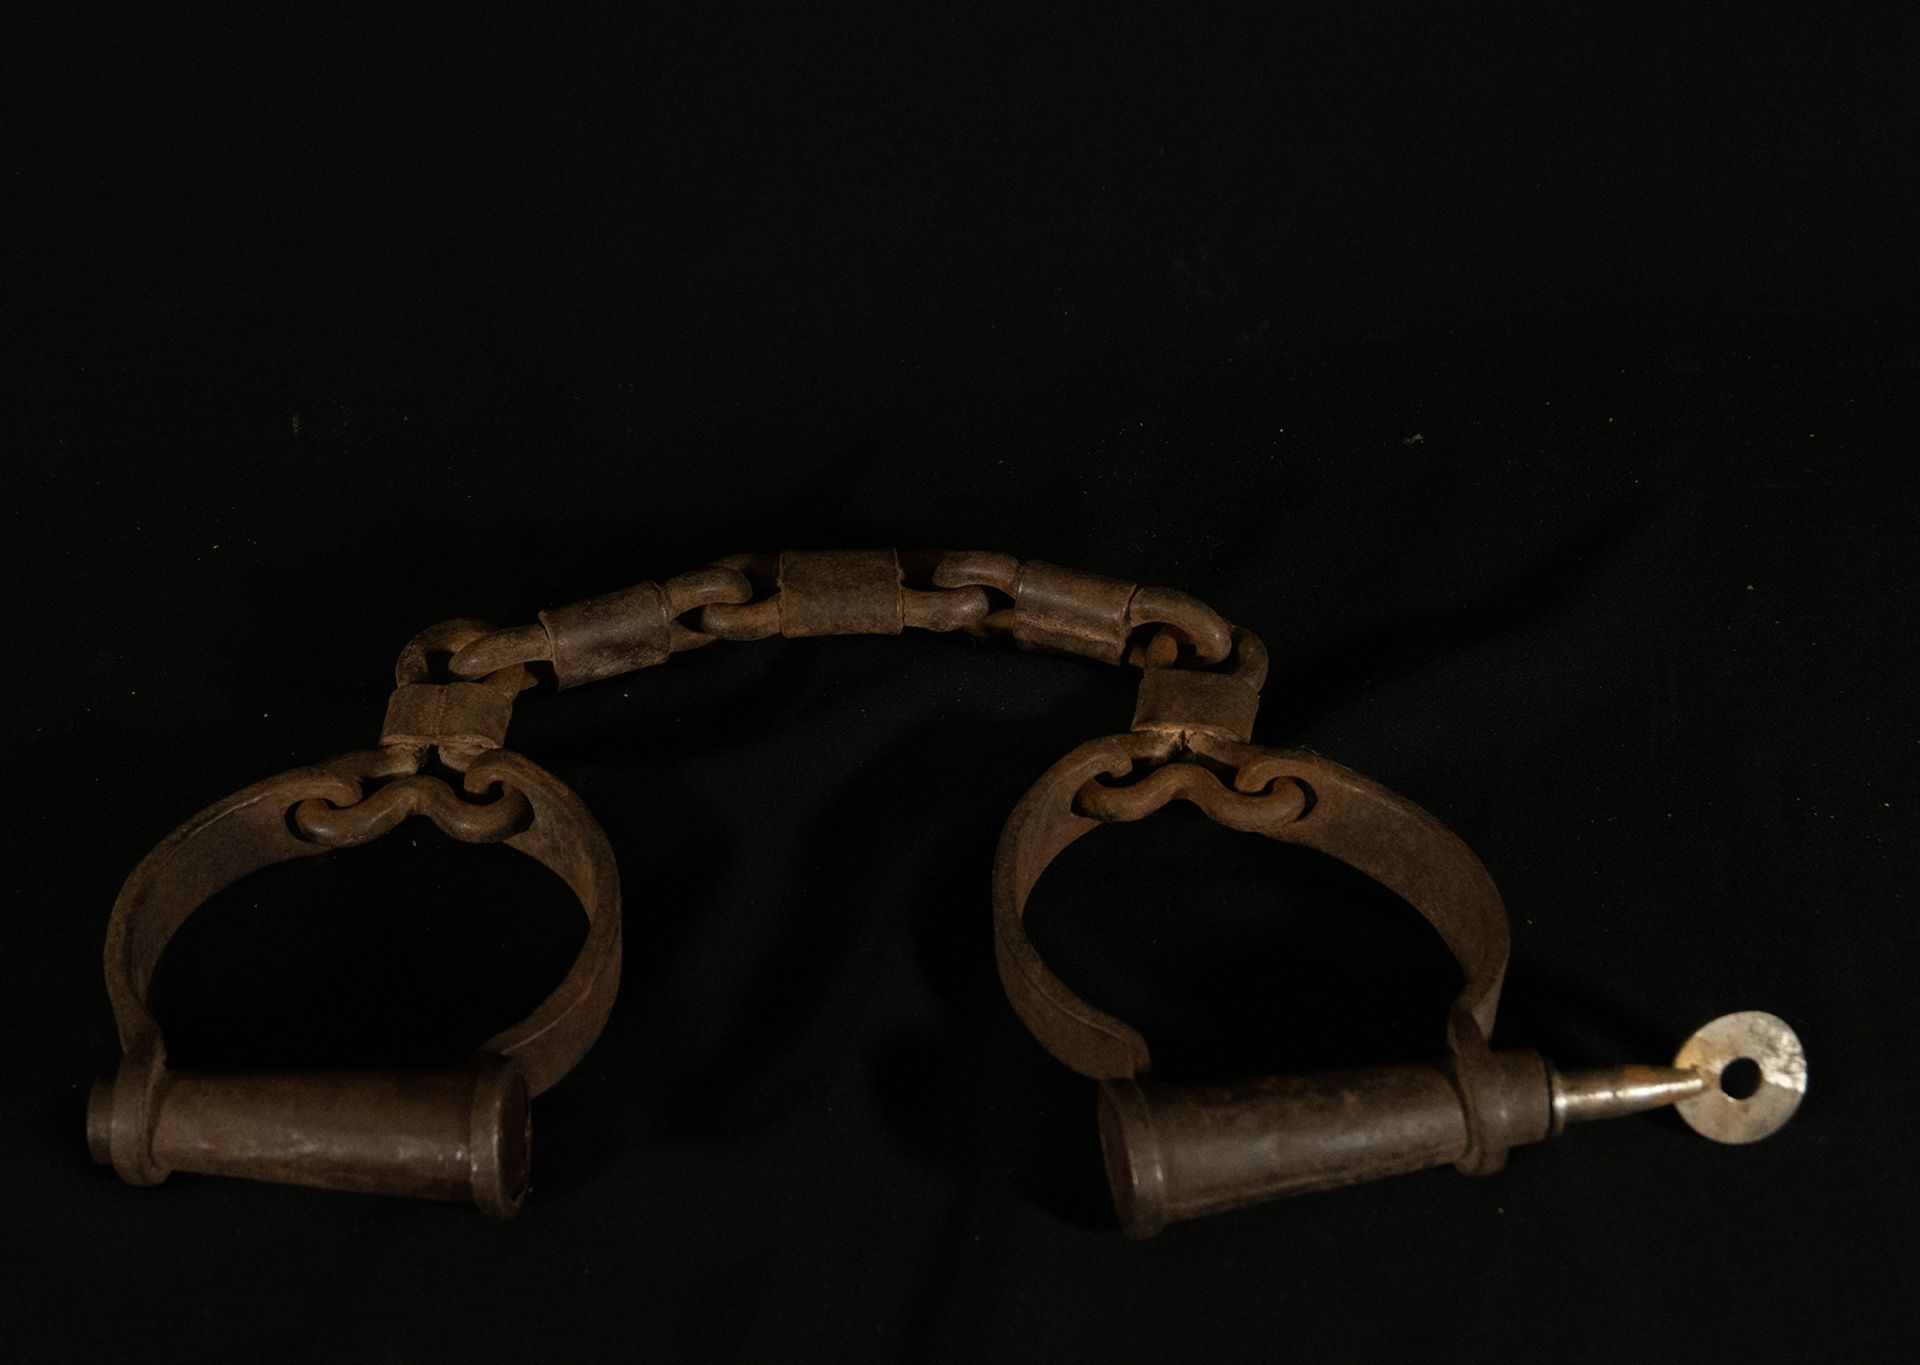 Handcuffs for prisoner or slave, Colonial India, 19th century